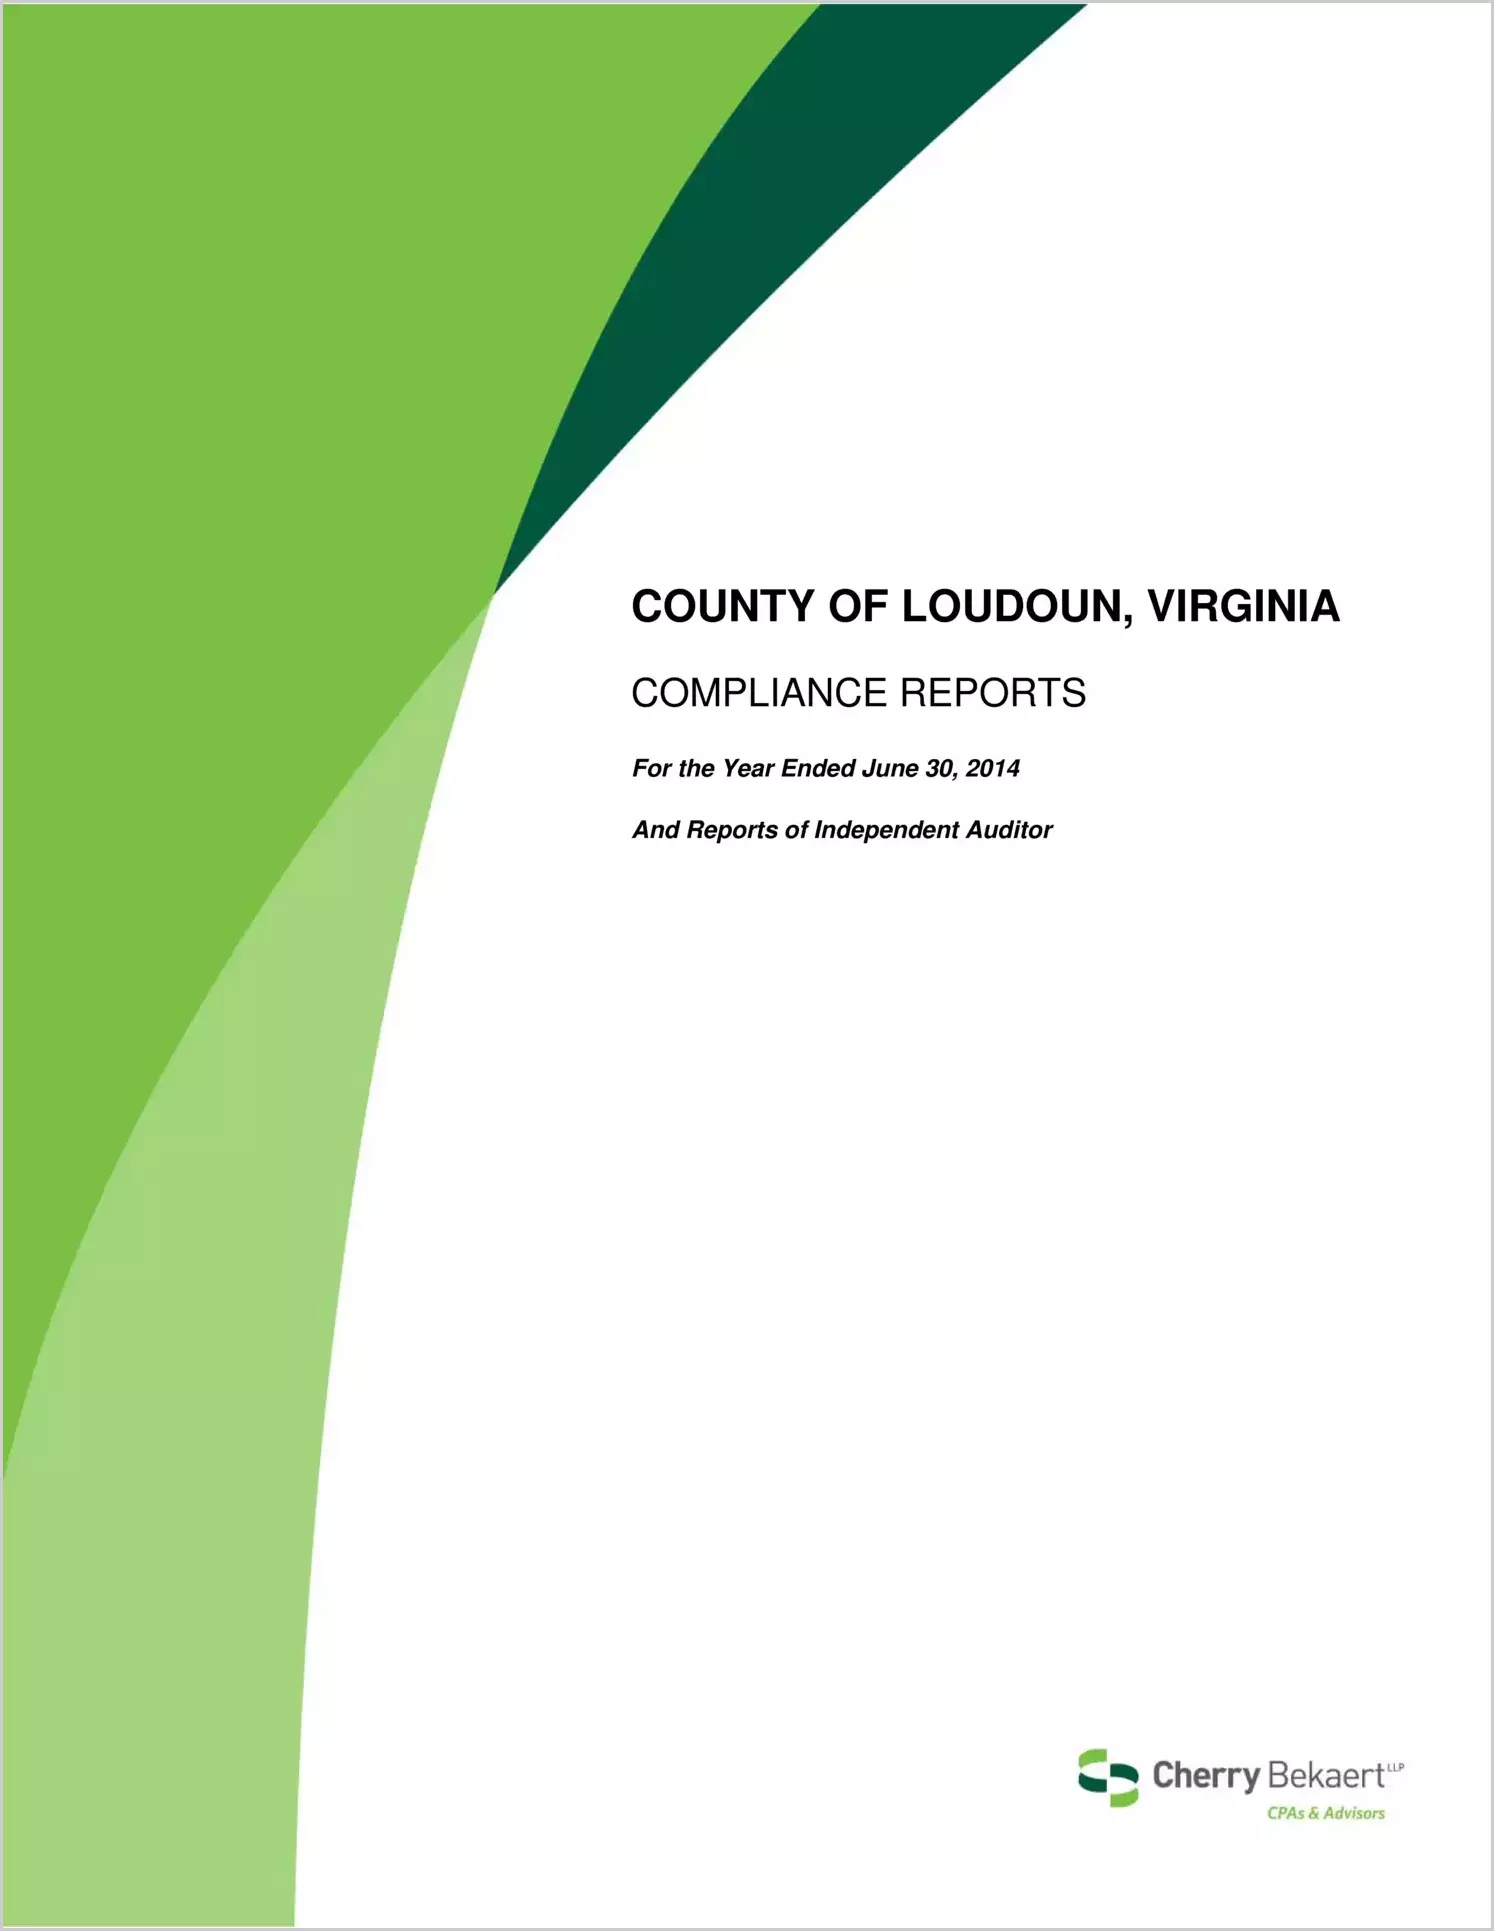 2014 Internal Control and Compliance Report for County of Loudoun